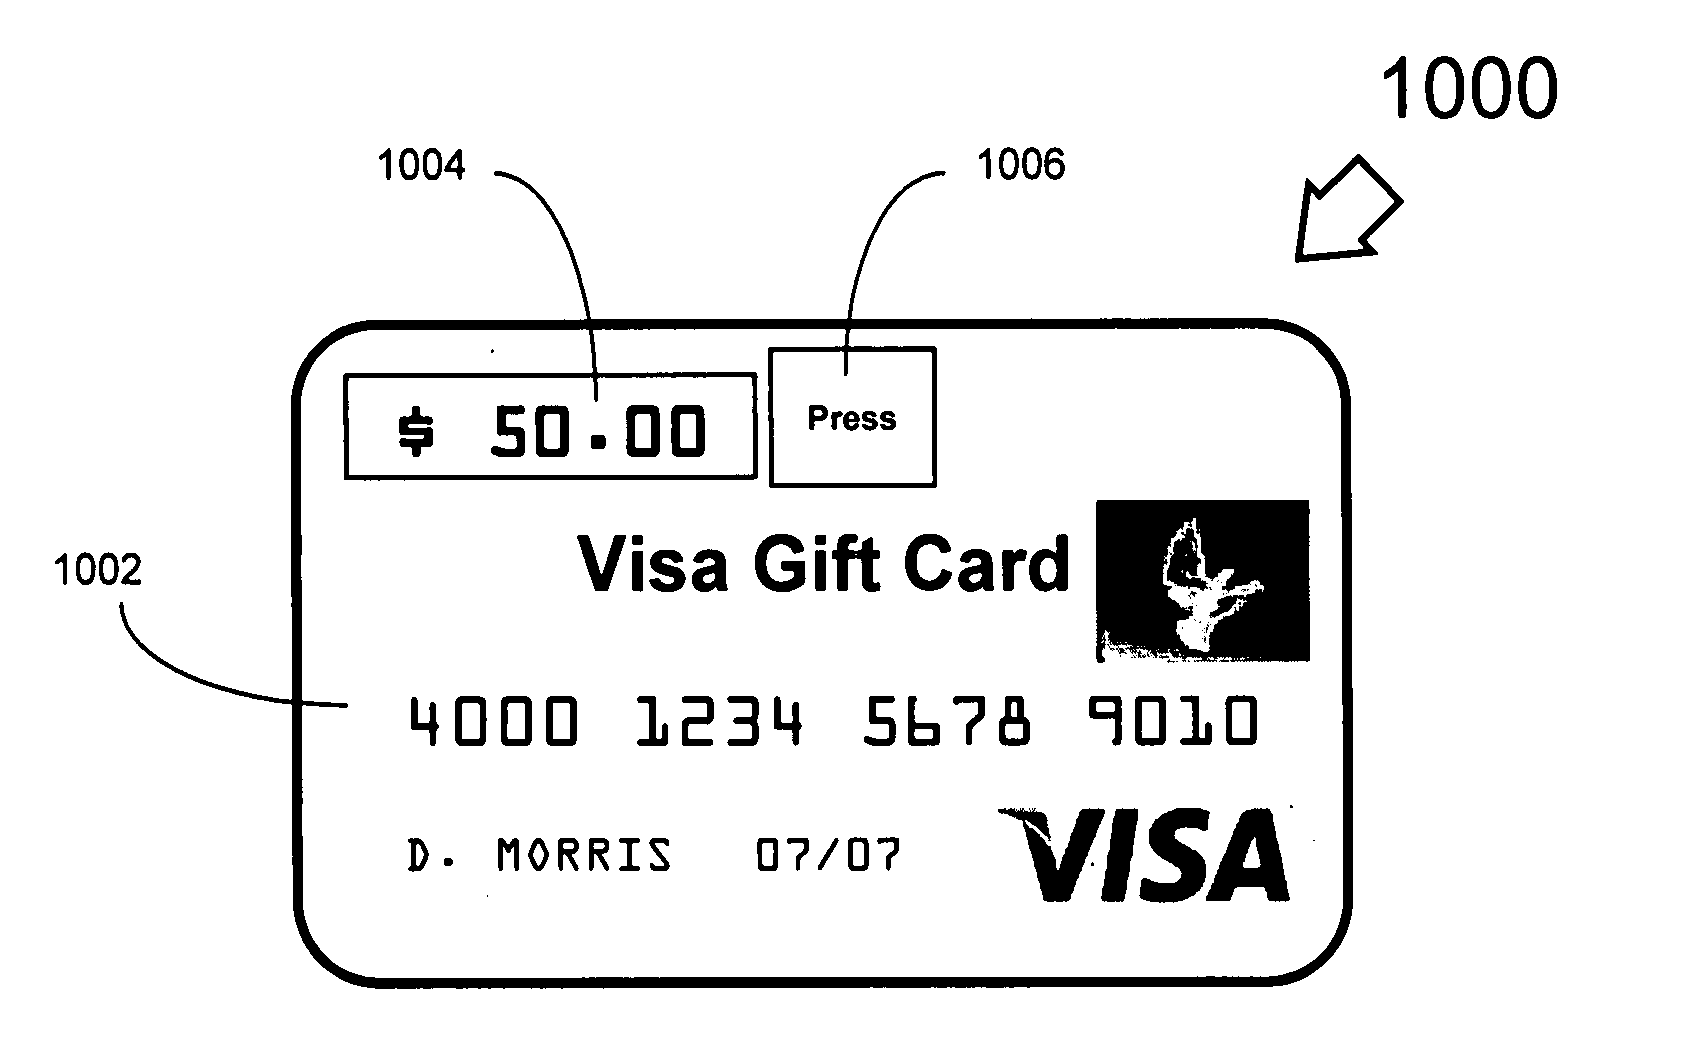 Real-time card balance on card plastic